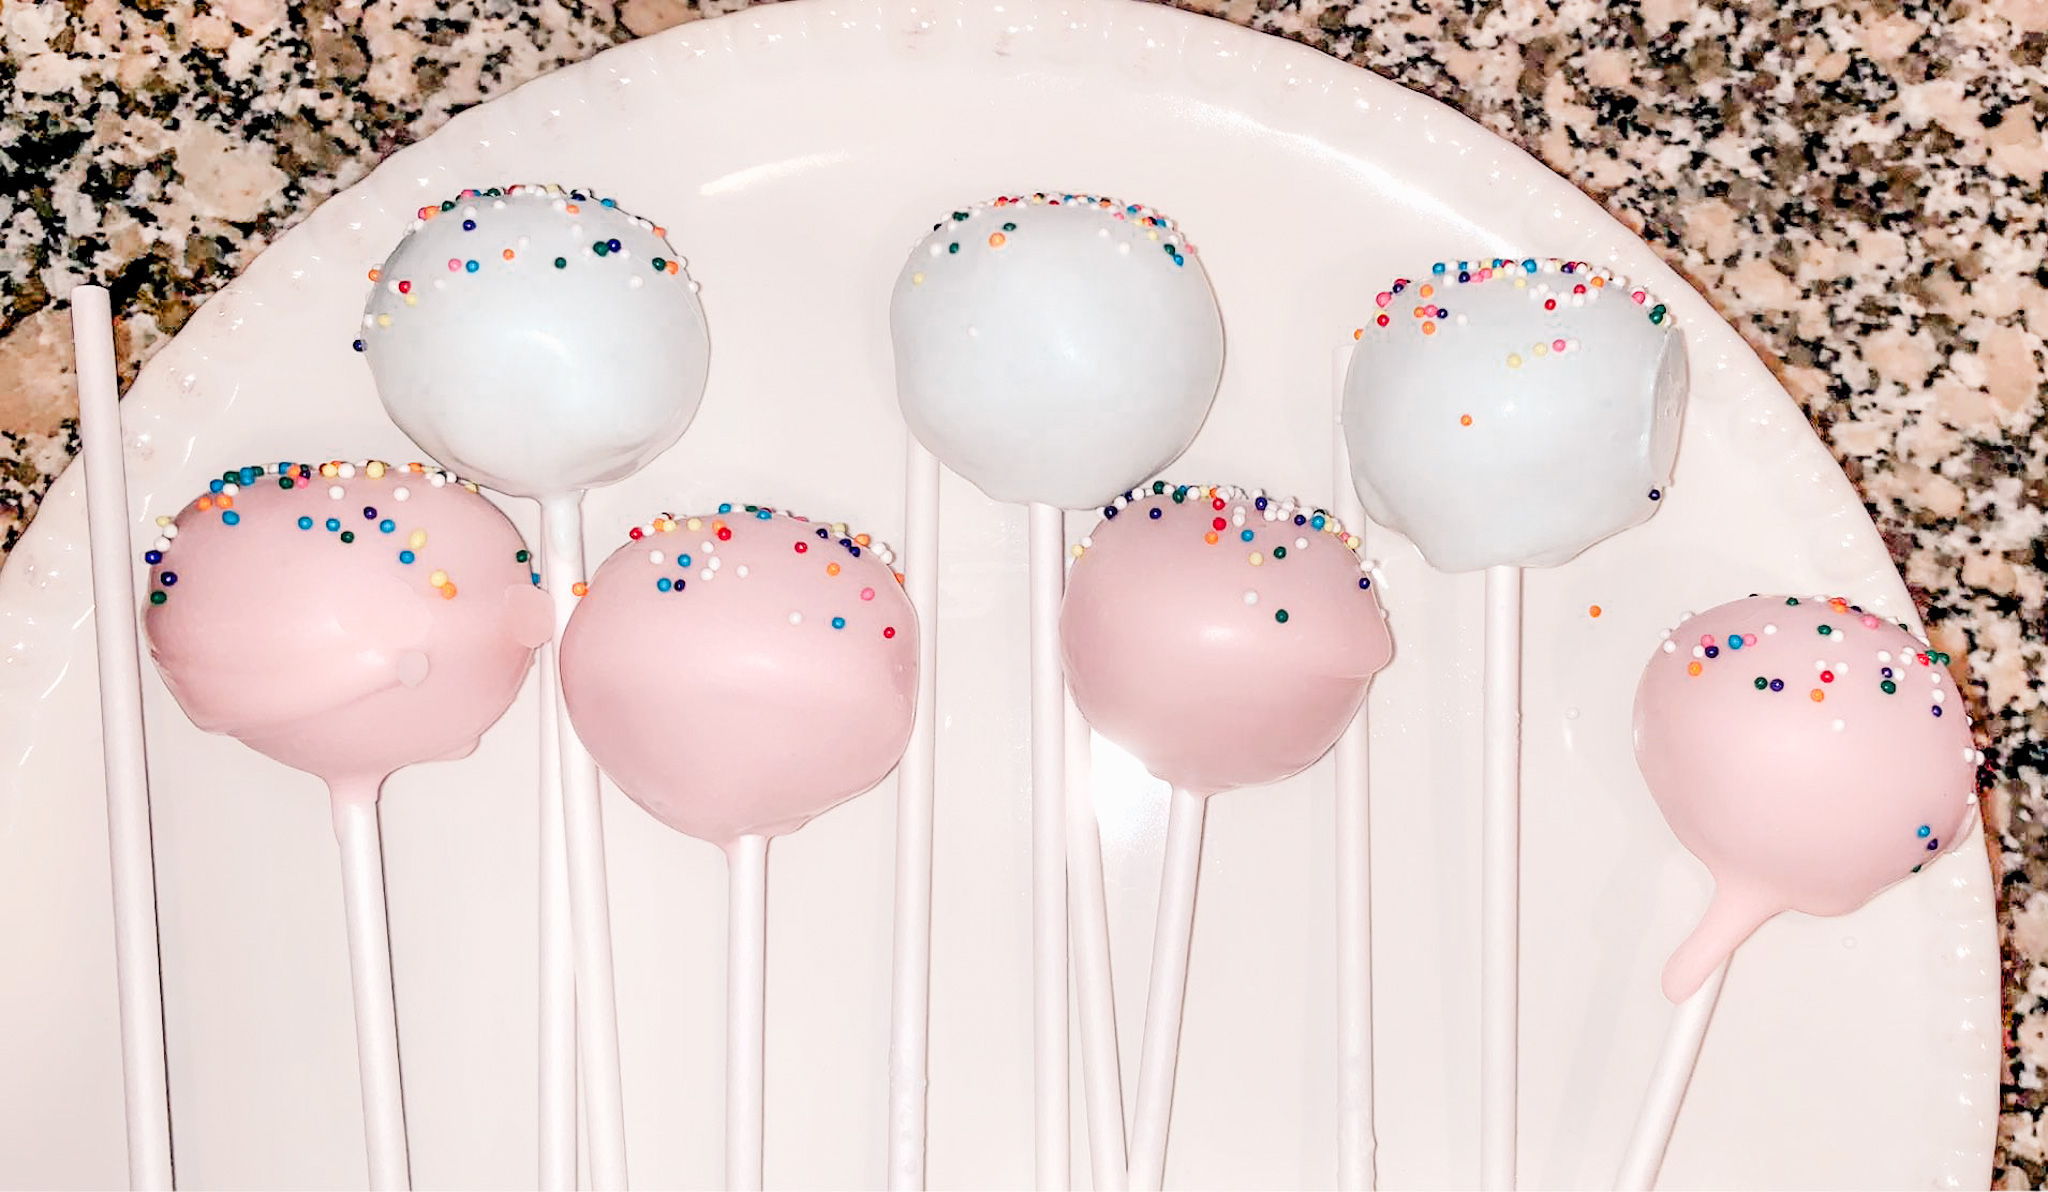 Light pink and blue cake pops with sprinkles on top.